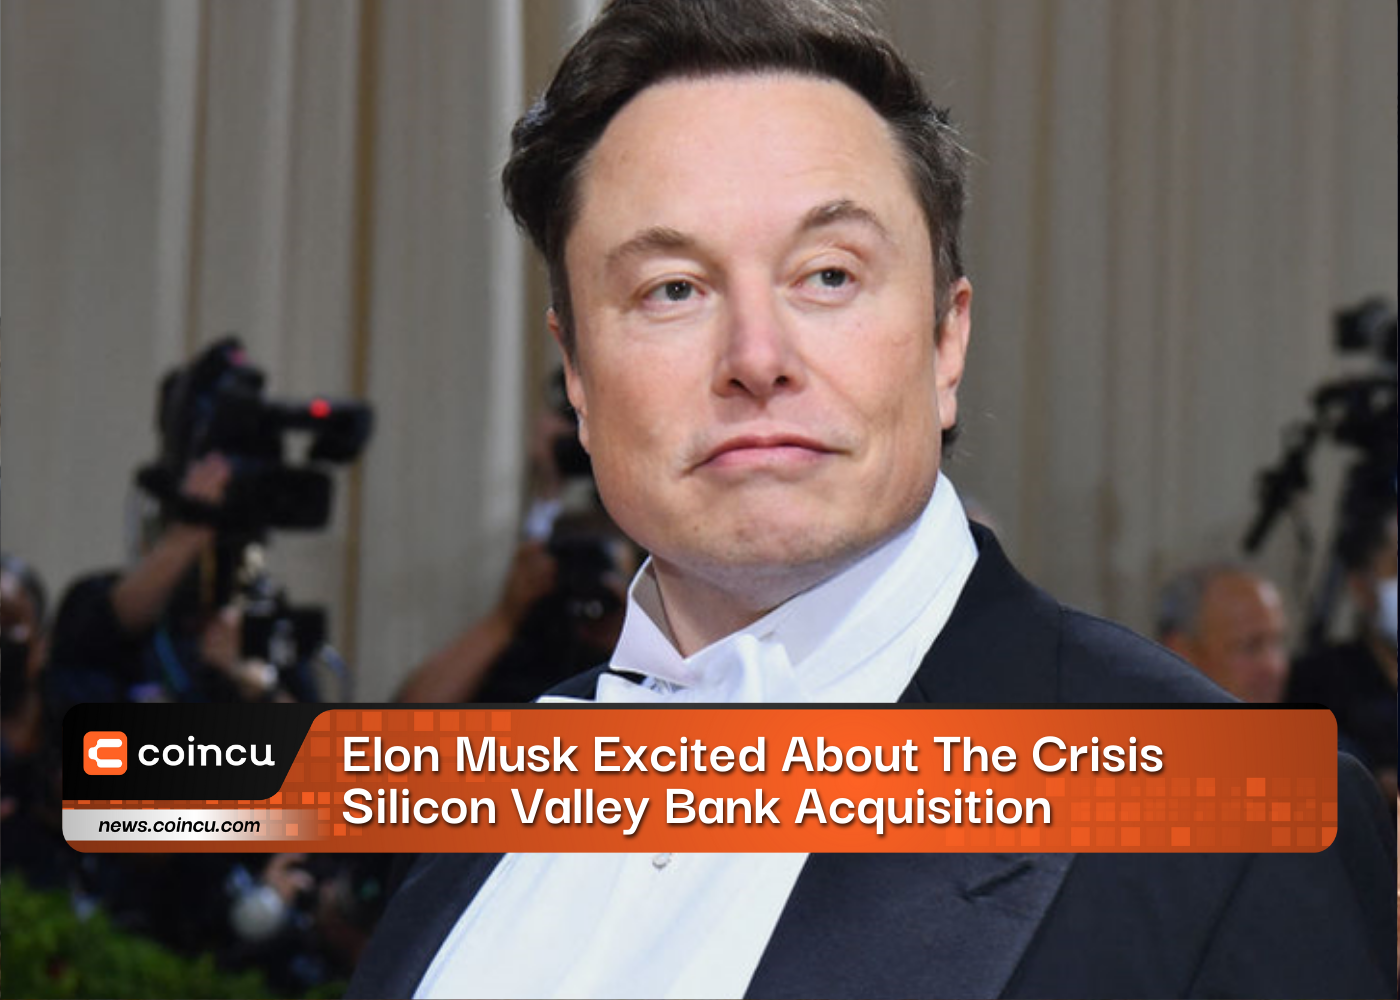 Elon Musk Excited About The Crisis Silicon Valley Bank Acquisition